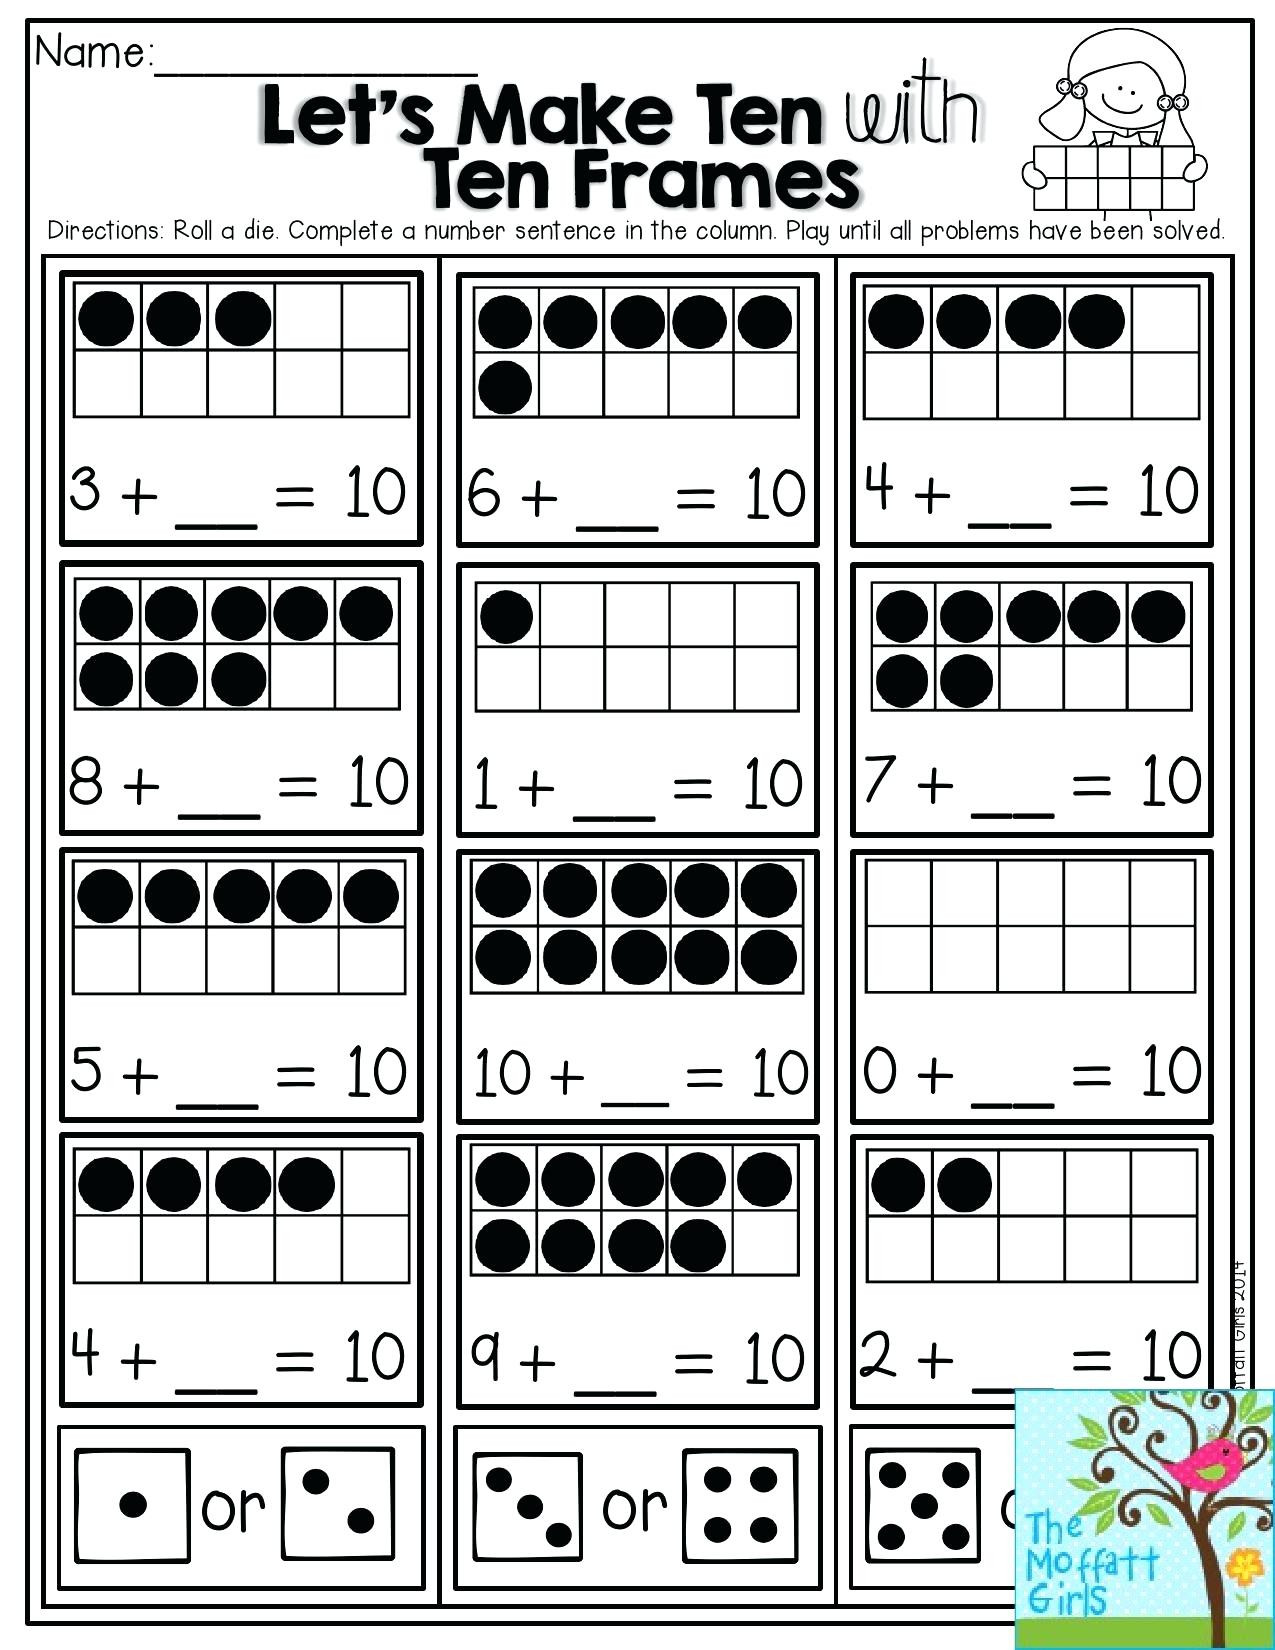 Free Math Worksheets Second Grade 2 Subtraction Subtract whole Tens From 2 Digit Numbers